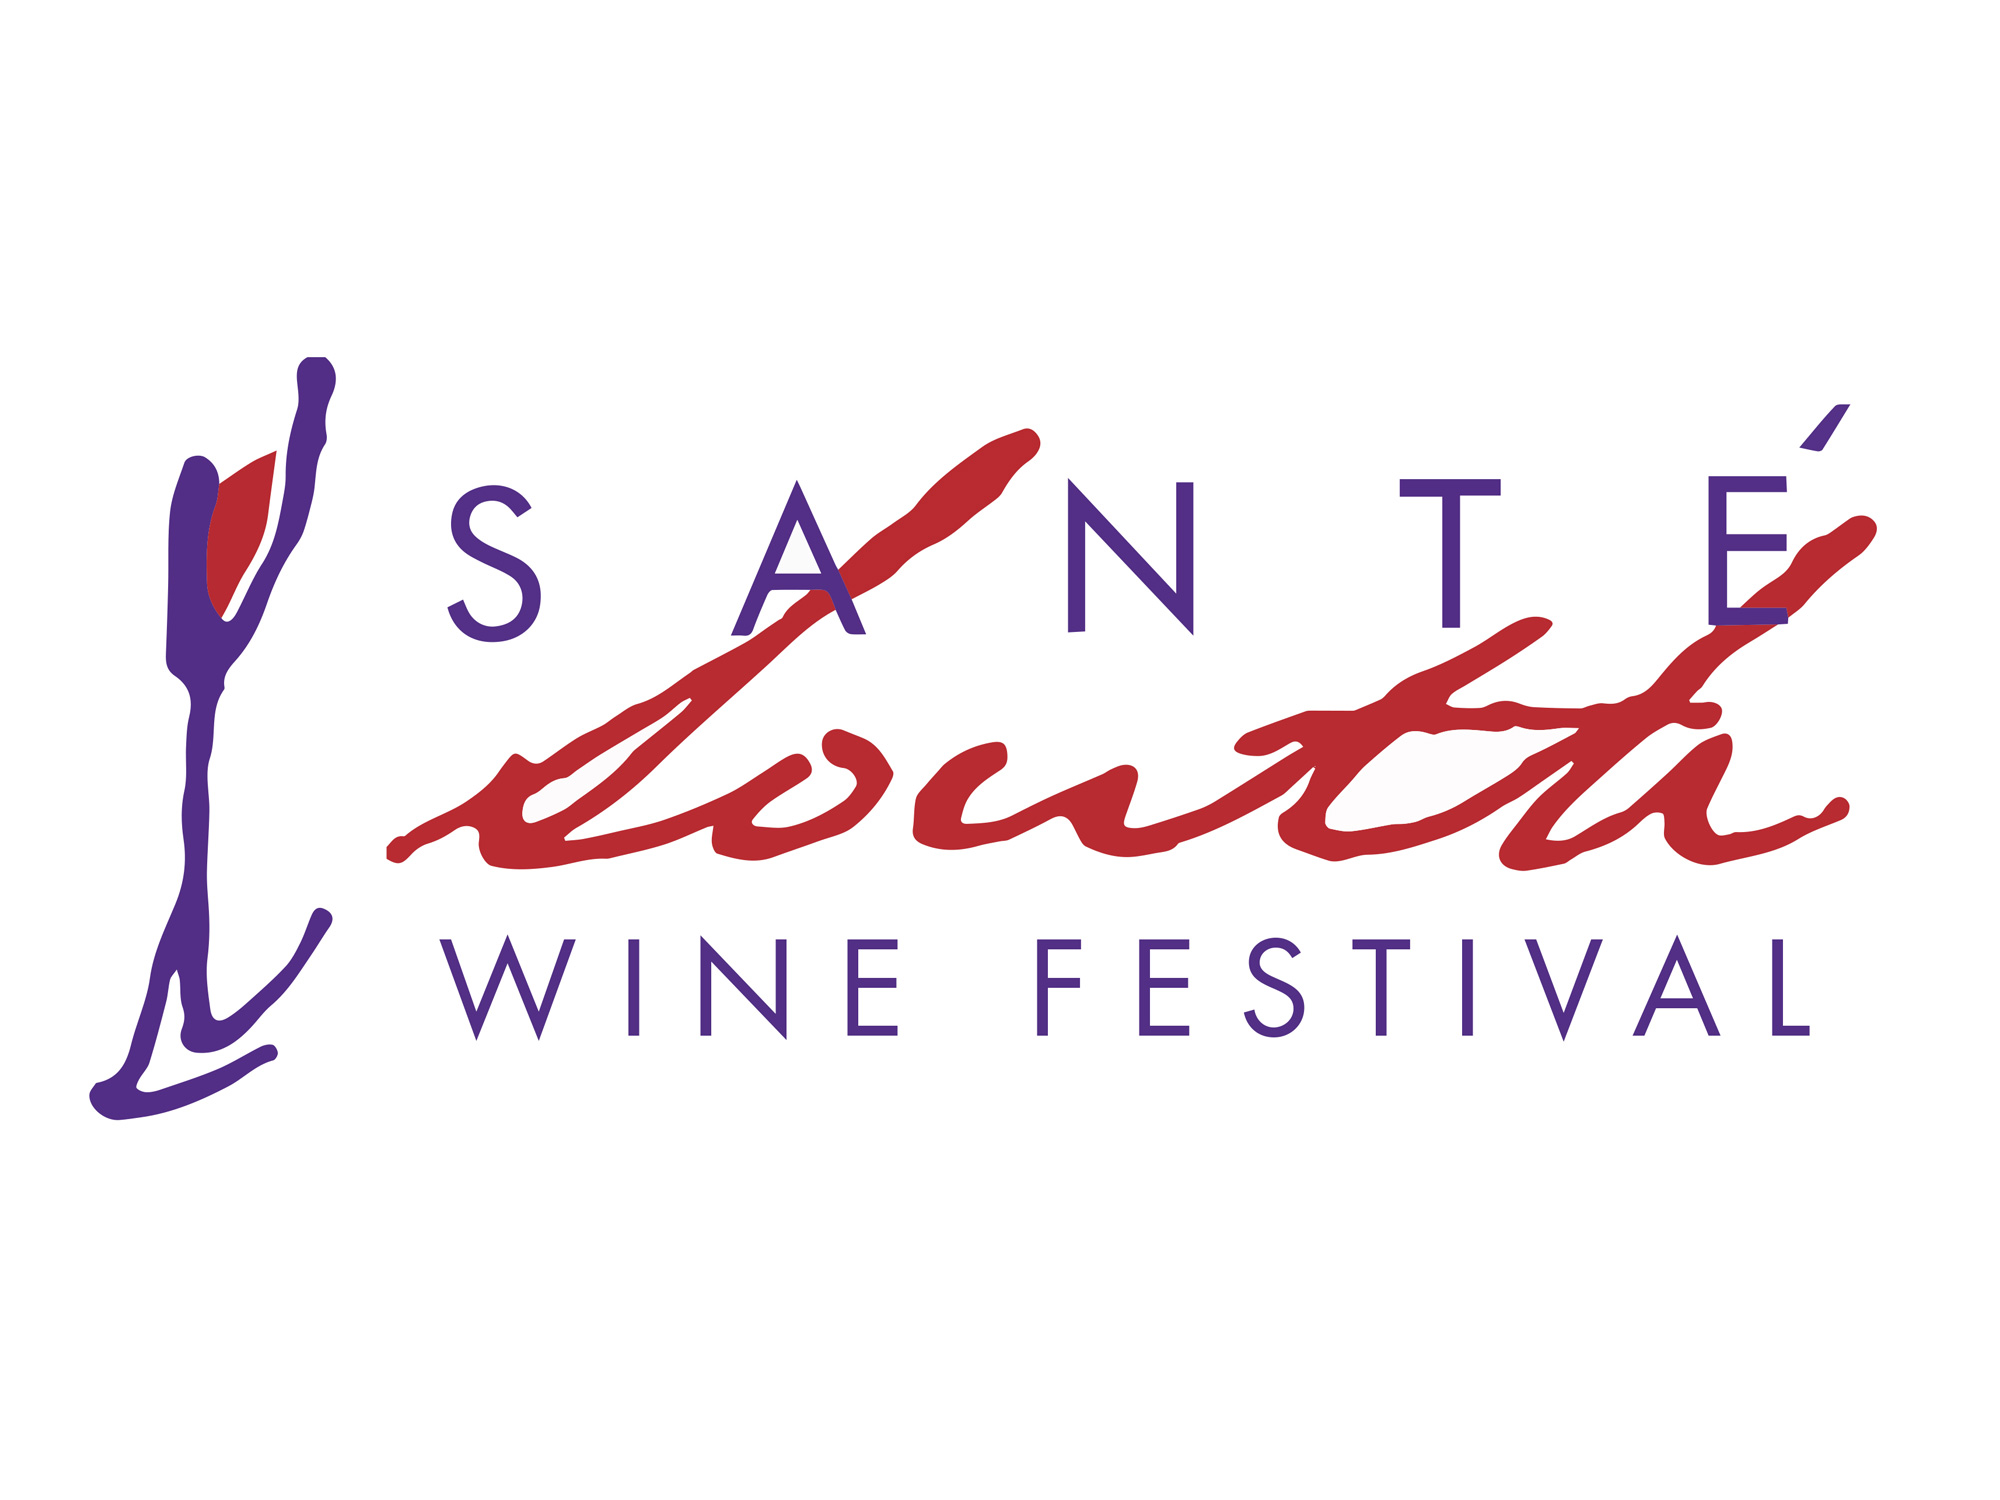 The Sante South Wine Festival will return in 2022 with a new beneficiary: The MIND Center at UMMC. Proceeds from the culinary extravaganza will support research, clinical care and education related to Alzheimer's disease and dementia.